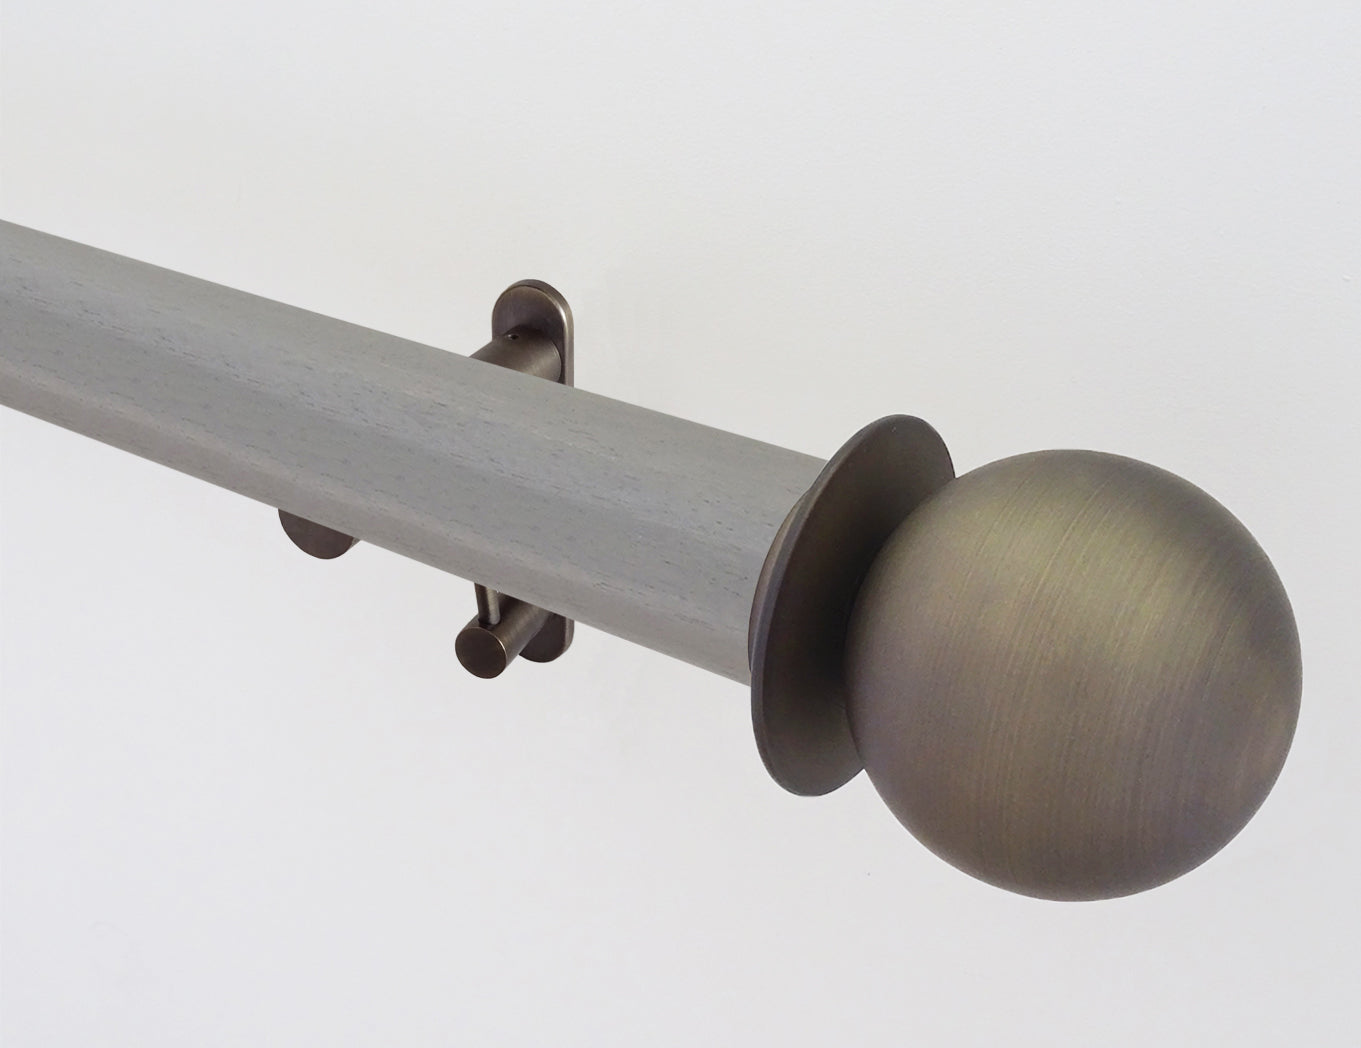 50mm dia. mouse stained wood curtain pole with bronze metal ball finials